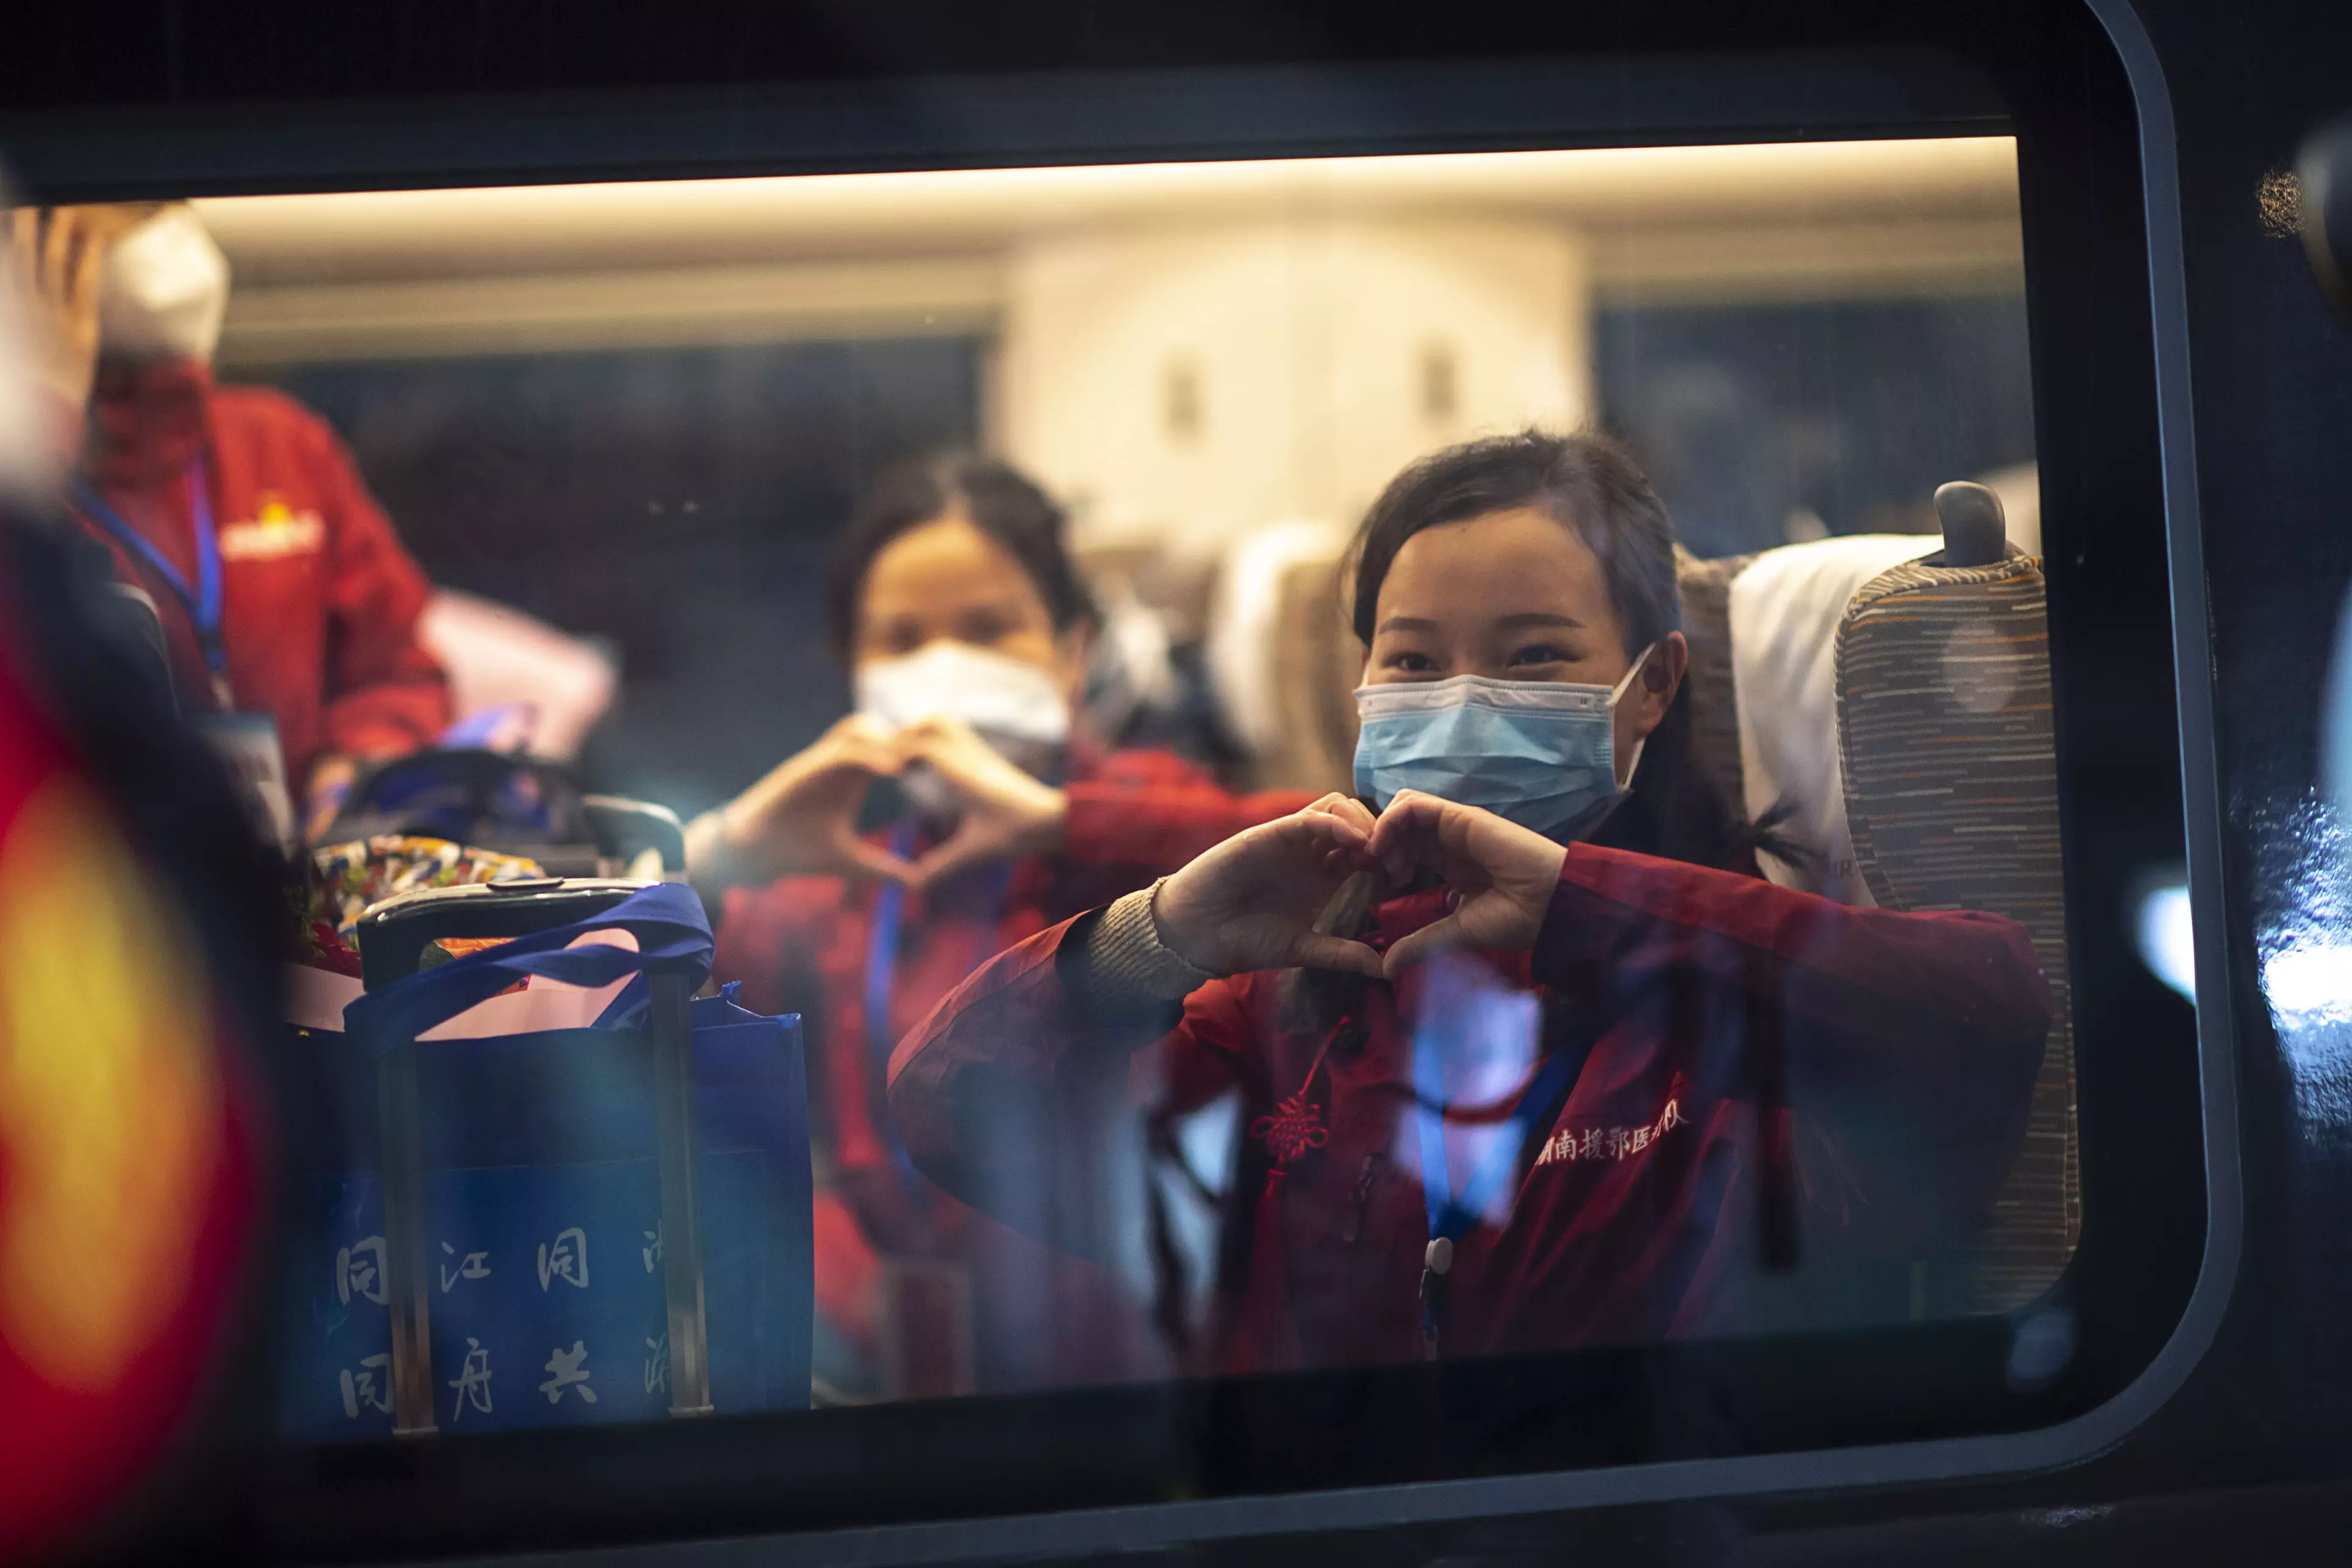 Medical staff from Hunan gesture on the train at a railway station in Wuhan.